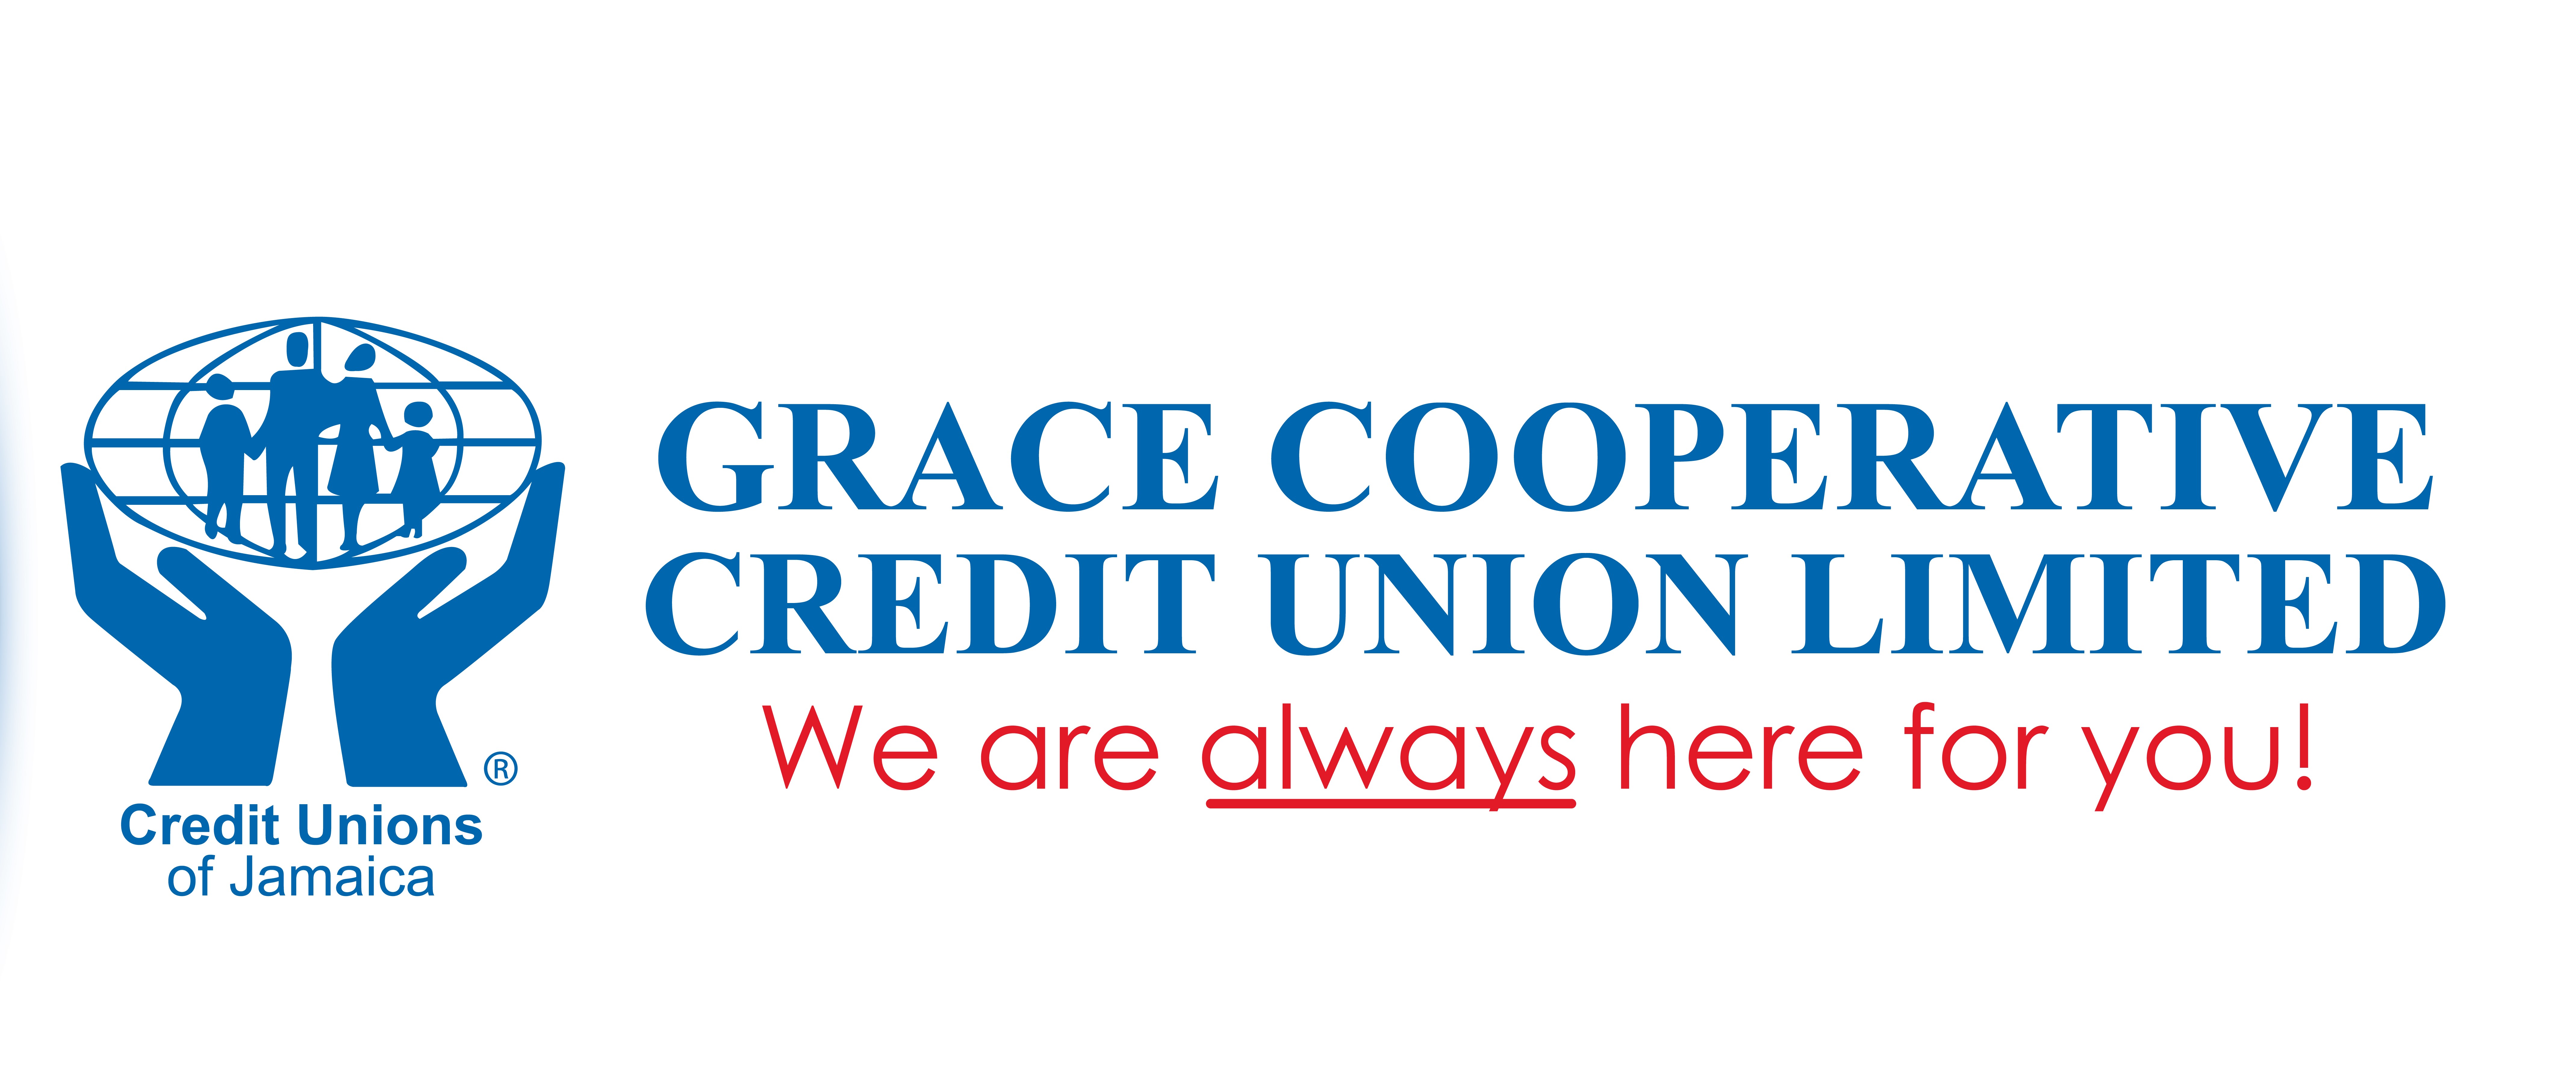 Grace Co-operative Credit Union Limited